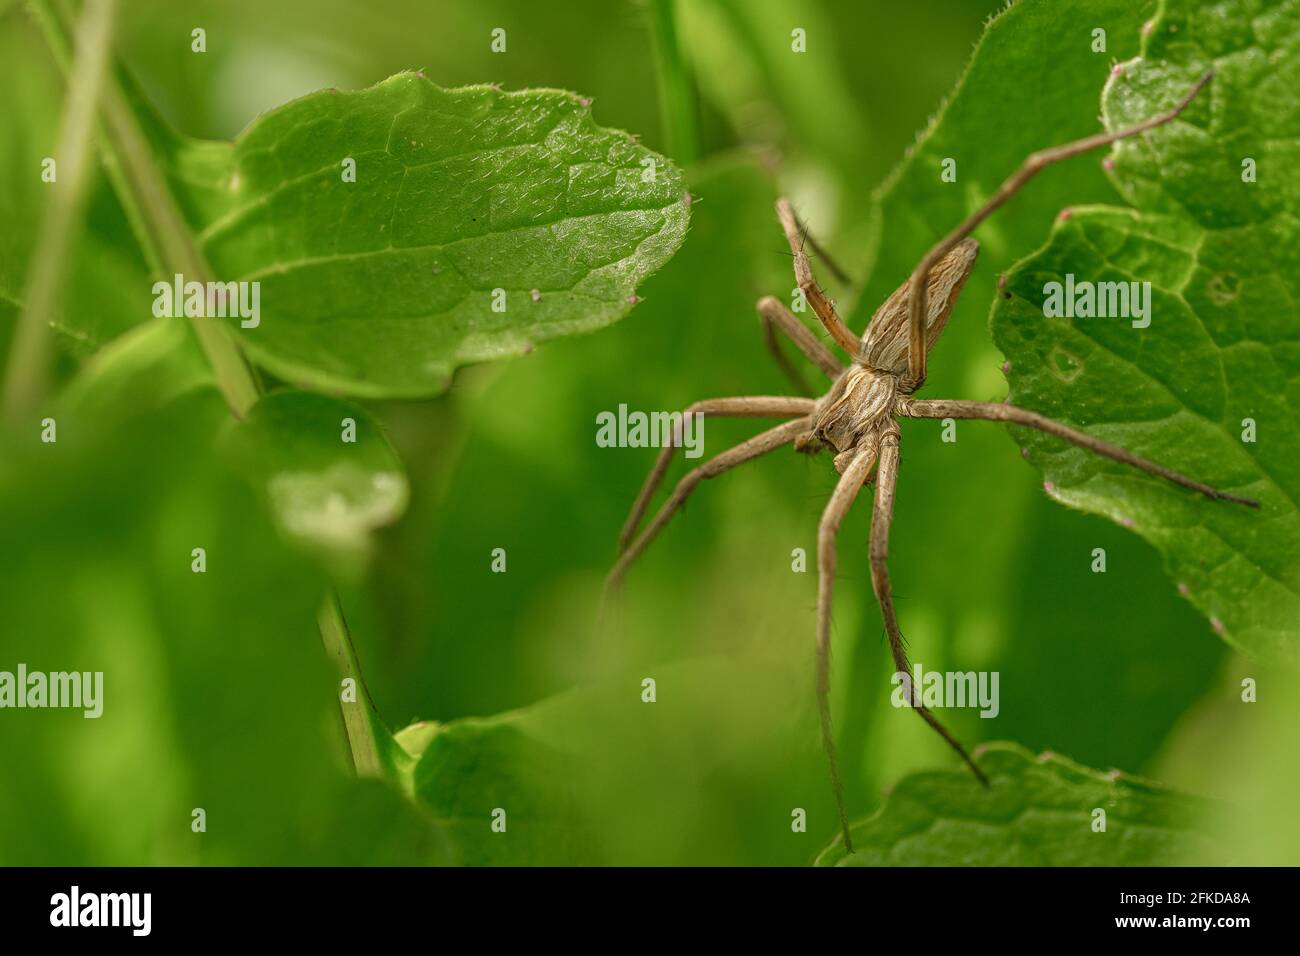 Spider insect macro view while hunting on wild ecosystem,animal wildlife  Stock Photo